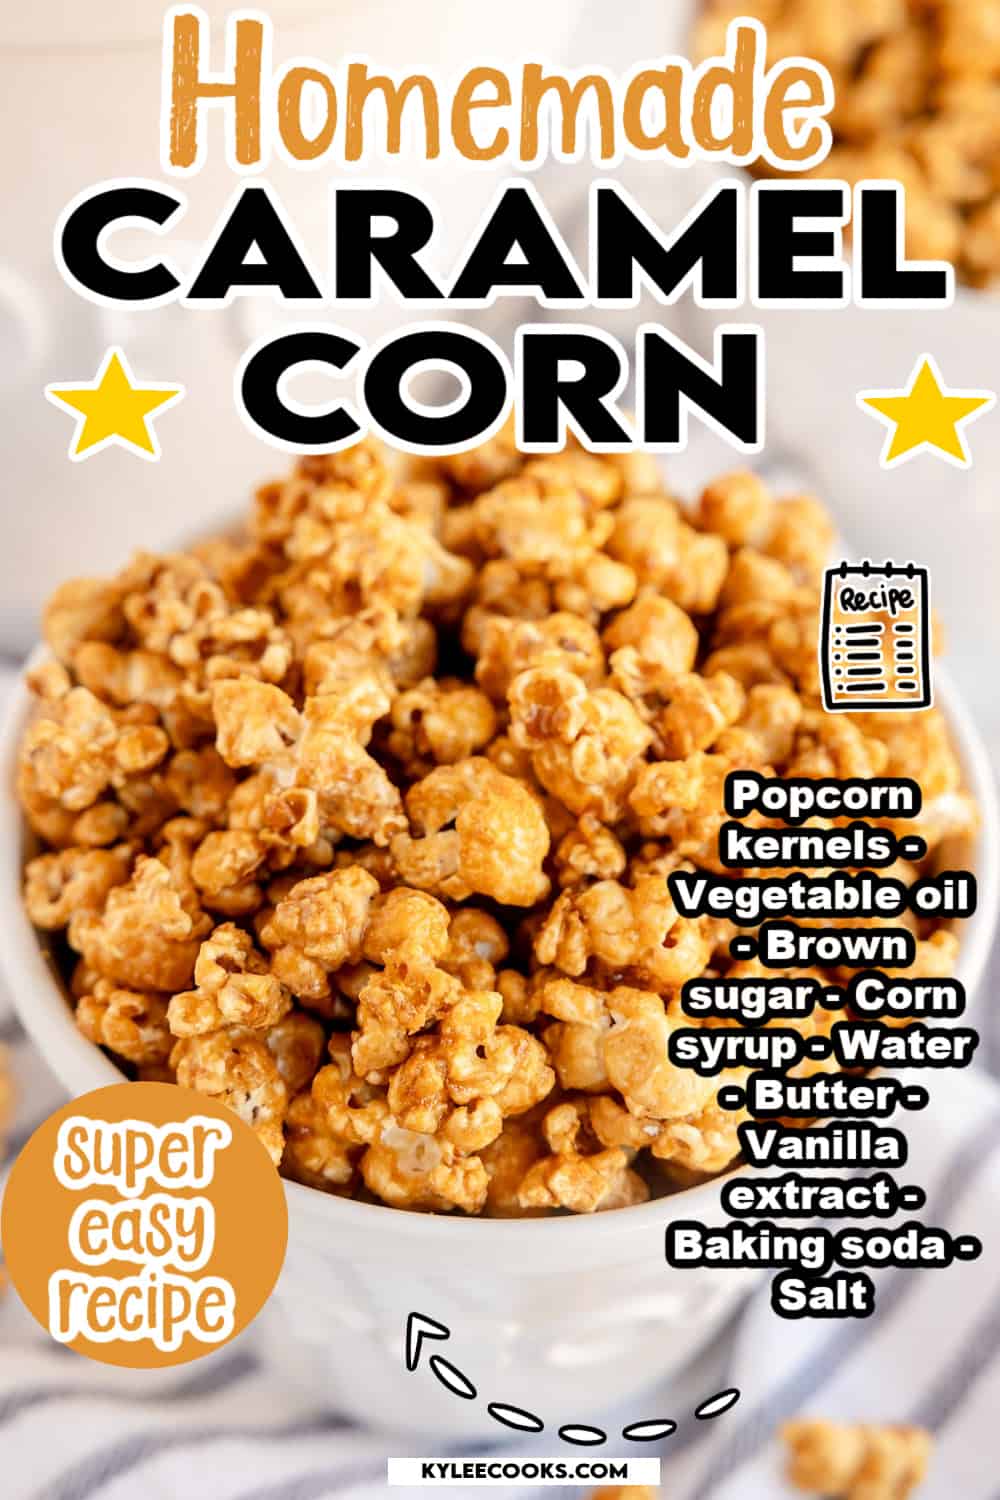 caramel corn in a white ceramic bowl with recipe name and ingredients overlaid in text.